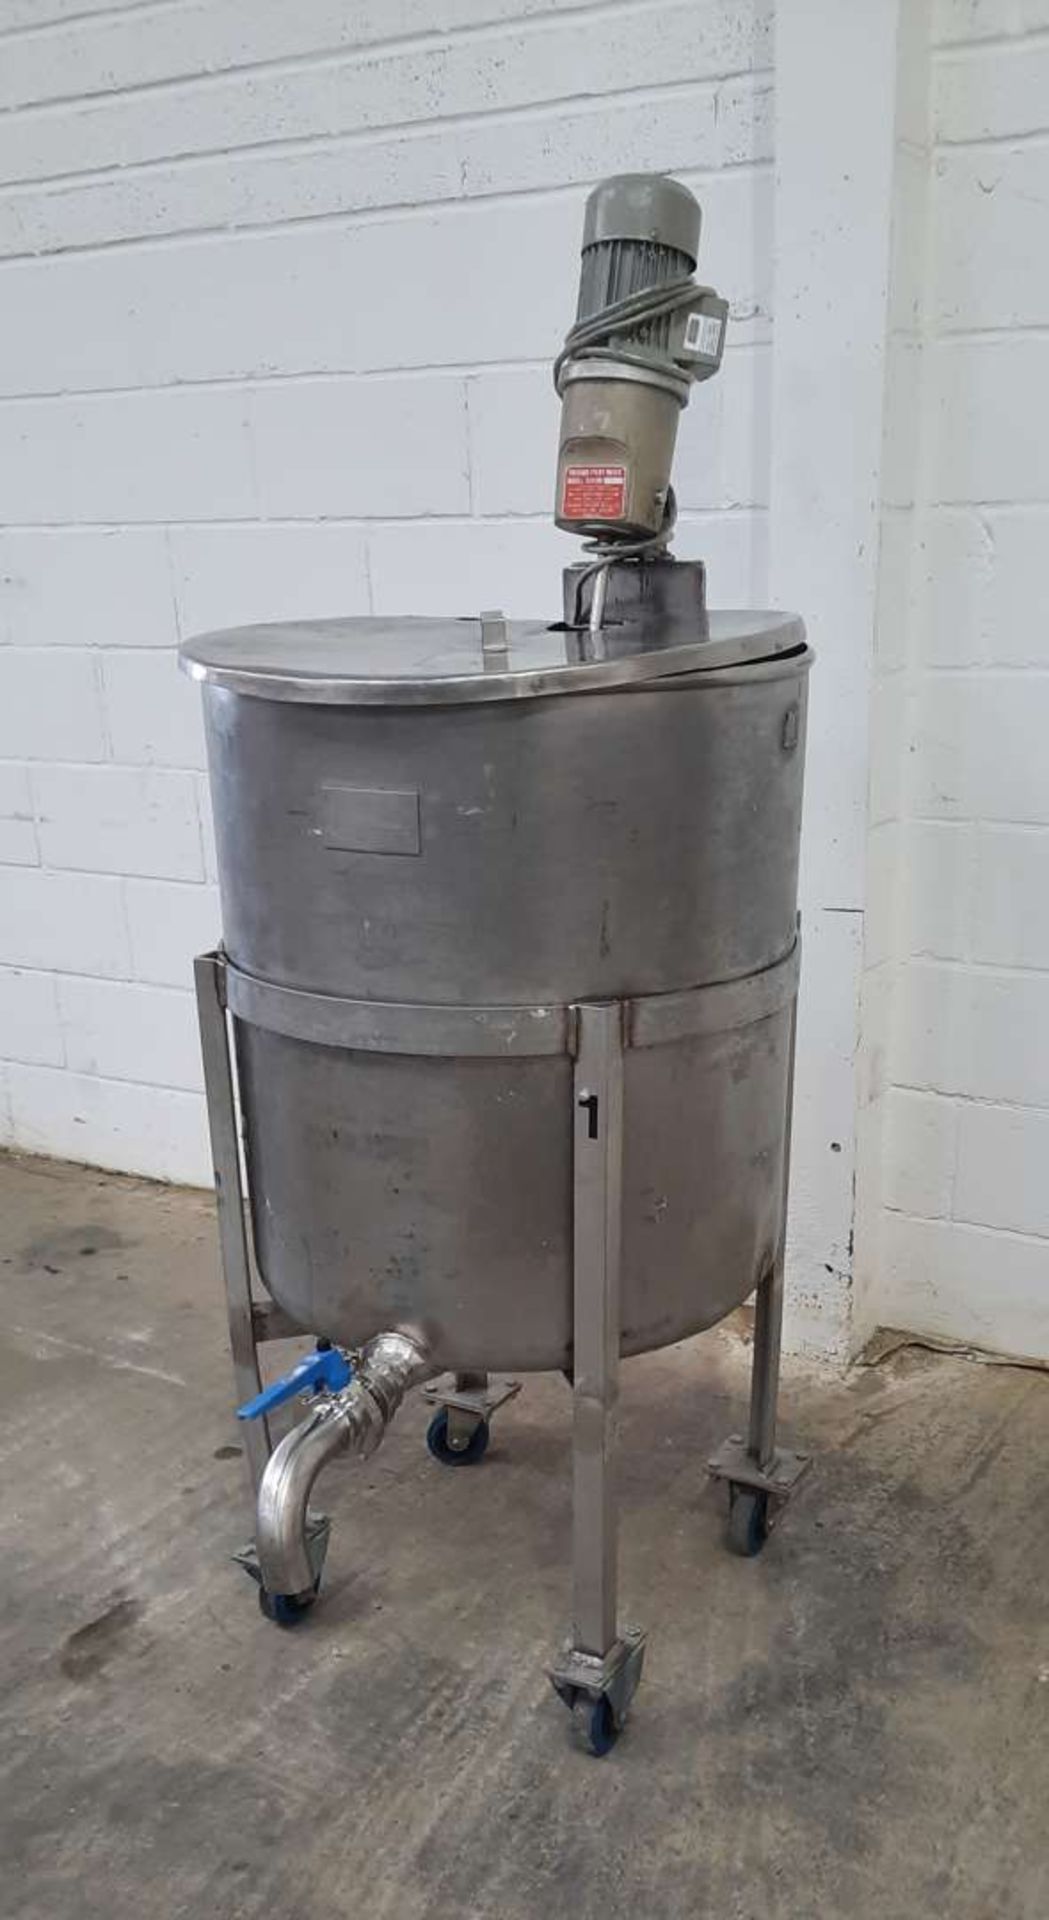 Top Entry 150 Litre Mixer - Image 3 of 6